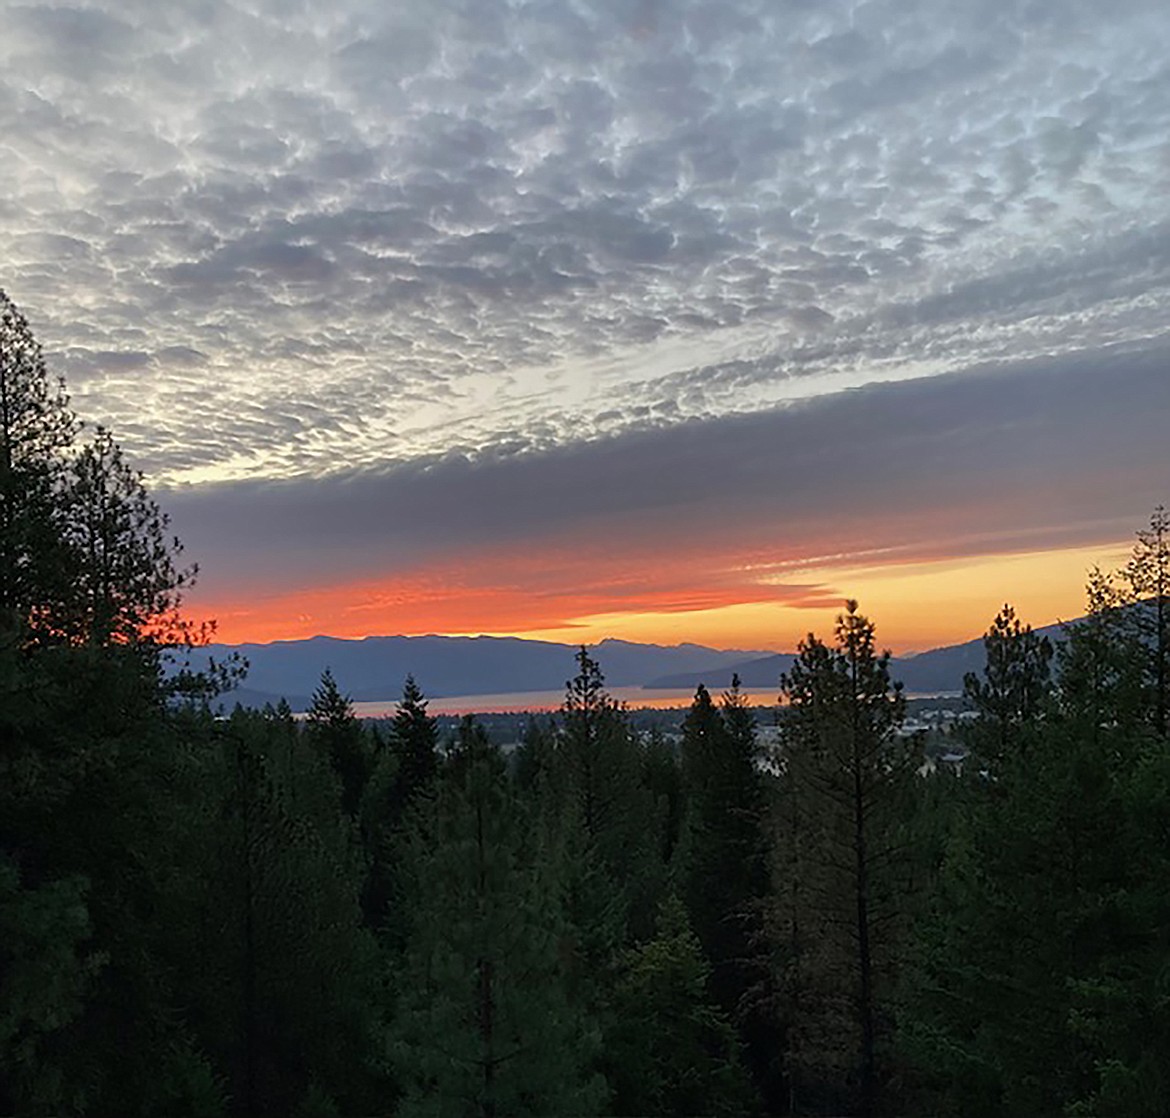 Nicky Pleass shared this Best Shot of a recent sunrise over Sandpoint. If you have a photo that you took that you would like to see run as a Best Shot or I Took The Bee send it in to the Bonner County Daily Bee, P.O. Box 159, Sandpoint, Idaho, 83864; or drop them off at 310 Church St., Sandpoint. You may also email your pictures in to the Bonner County Daily Bee along with your name, caption information, hometown and phone number to bcdailybee@bonnercountydailybee.com.